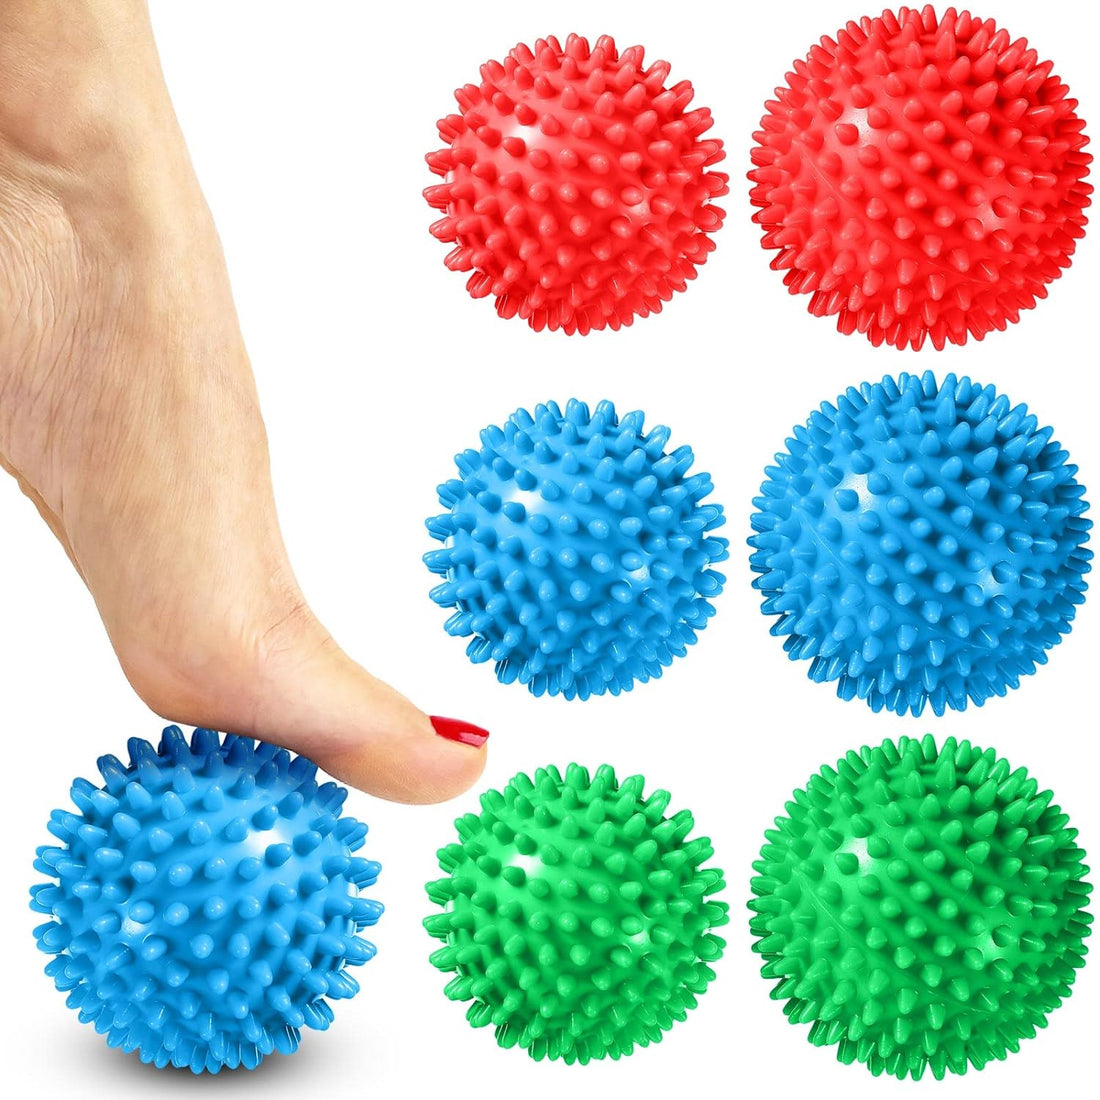 Jexine 6 Pieces Massage Ball for Feet Spiky Hard Massage Balls Muscles Spiky Roller for Plantar Fasciitis, Muscle Soreness Back, Hands, Exercise, Neuro Balance, Physical Therapy, 3 Inch, 3.5 Inch